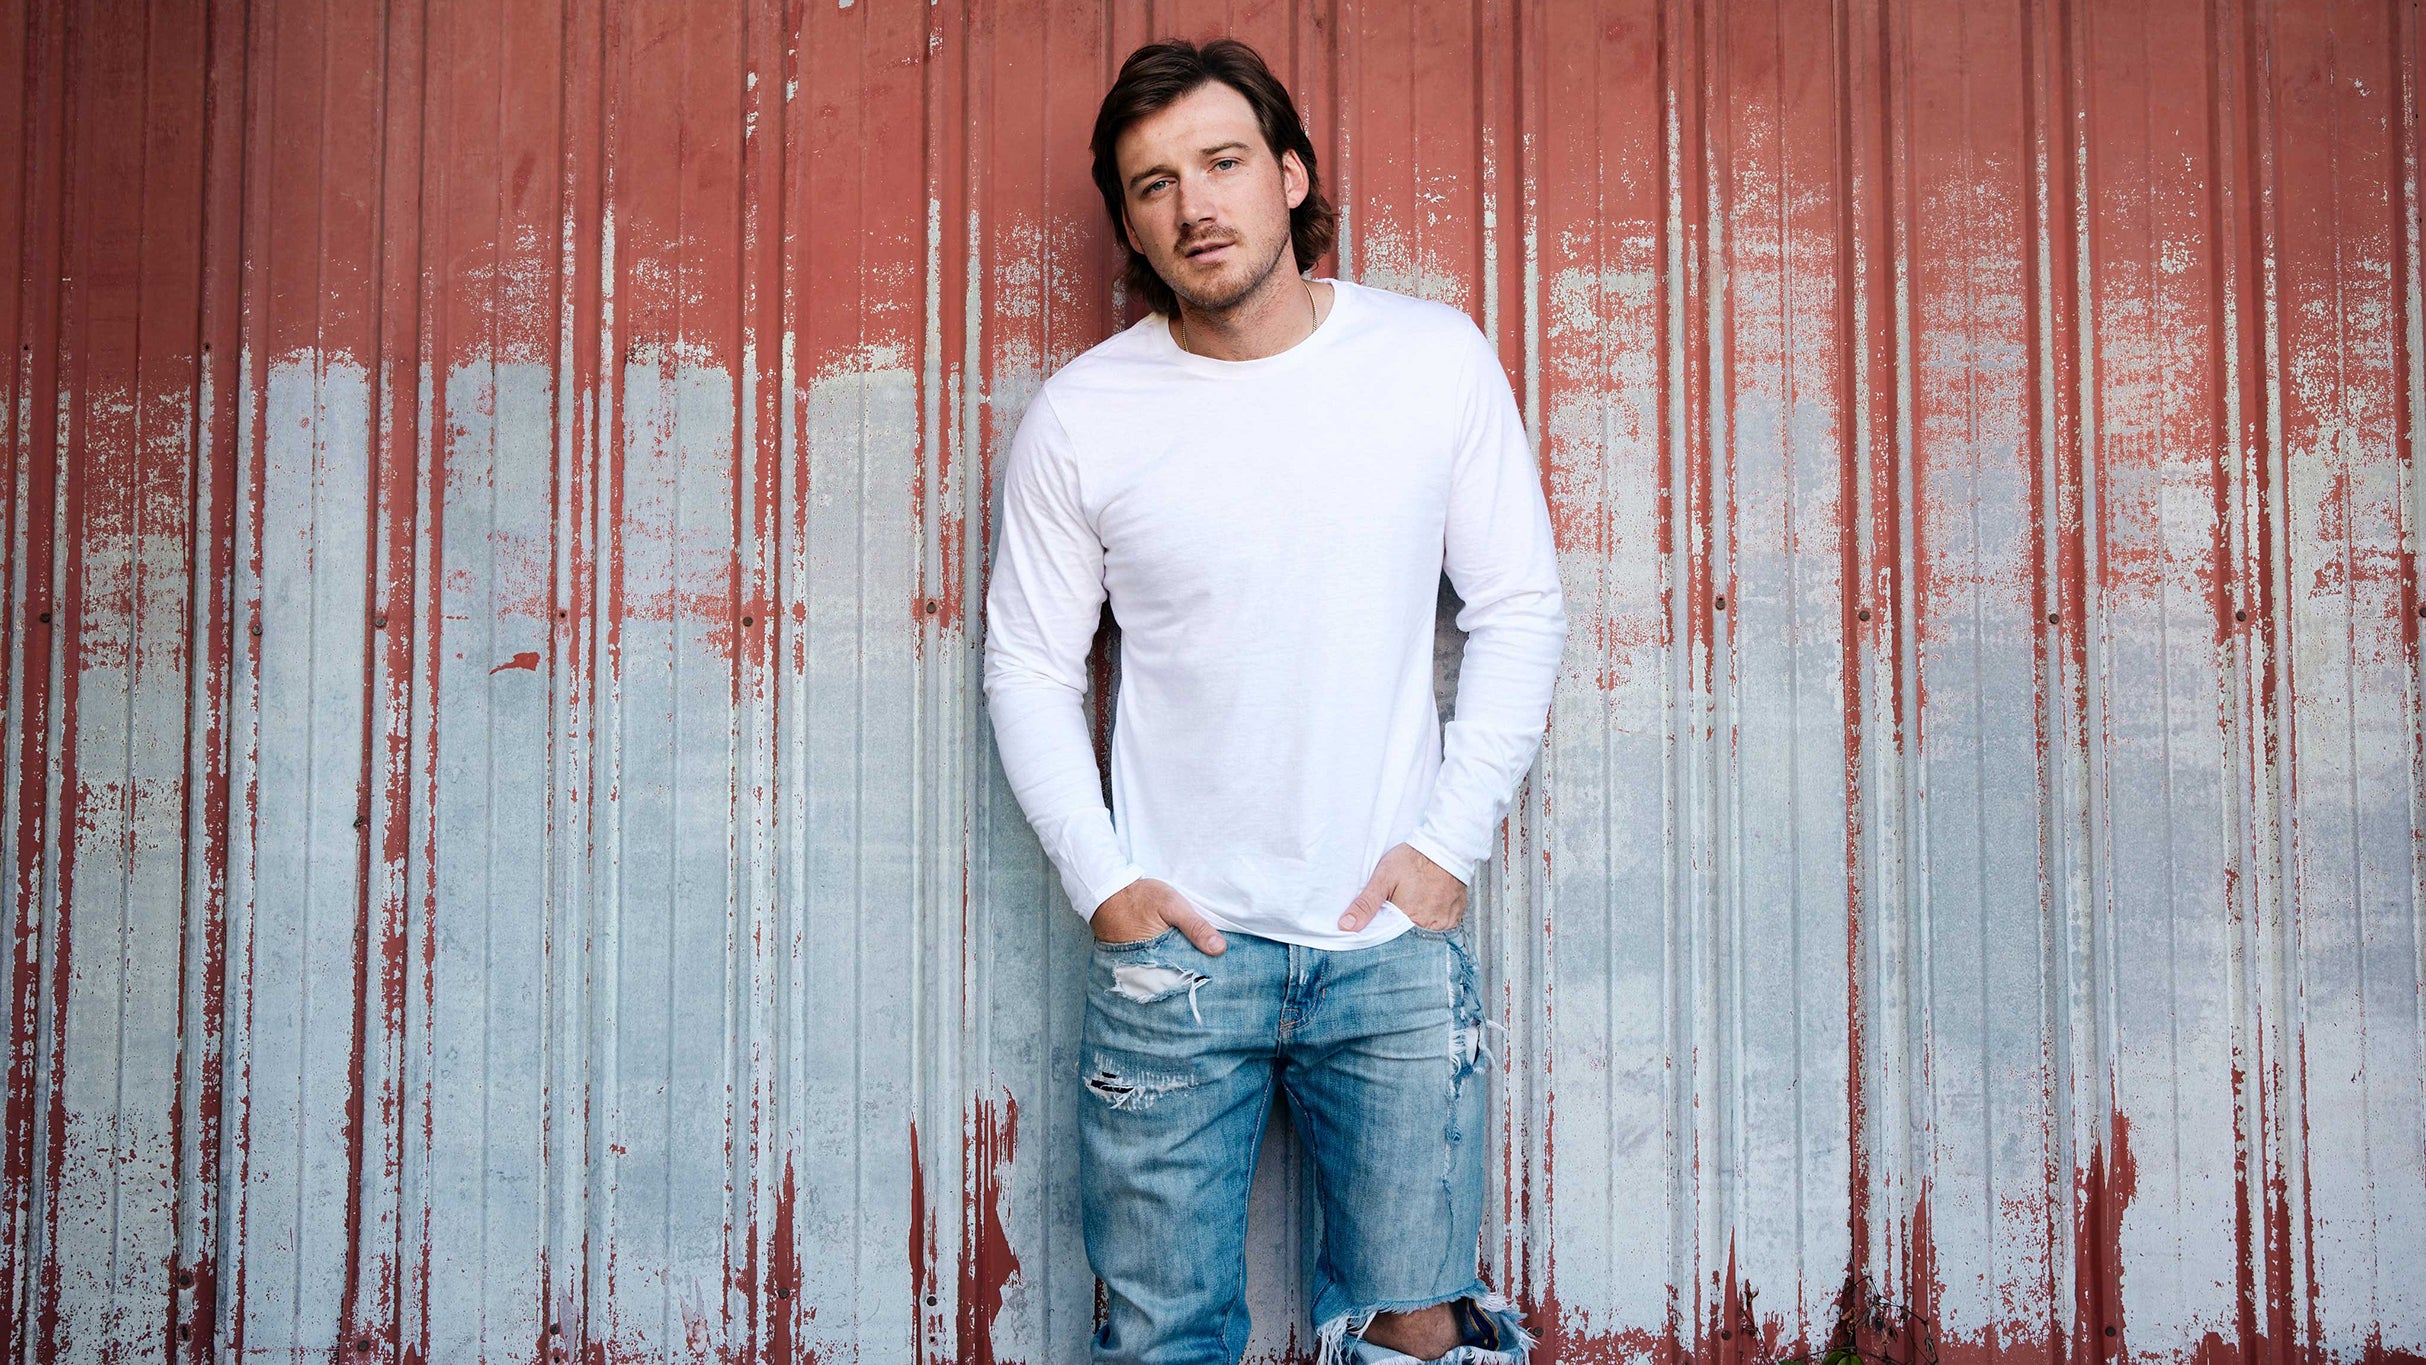 Morgan Wallen: One Night At A Time World Tour in Washington event information